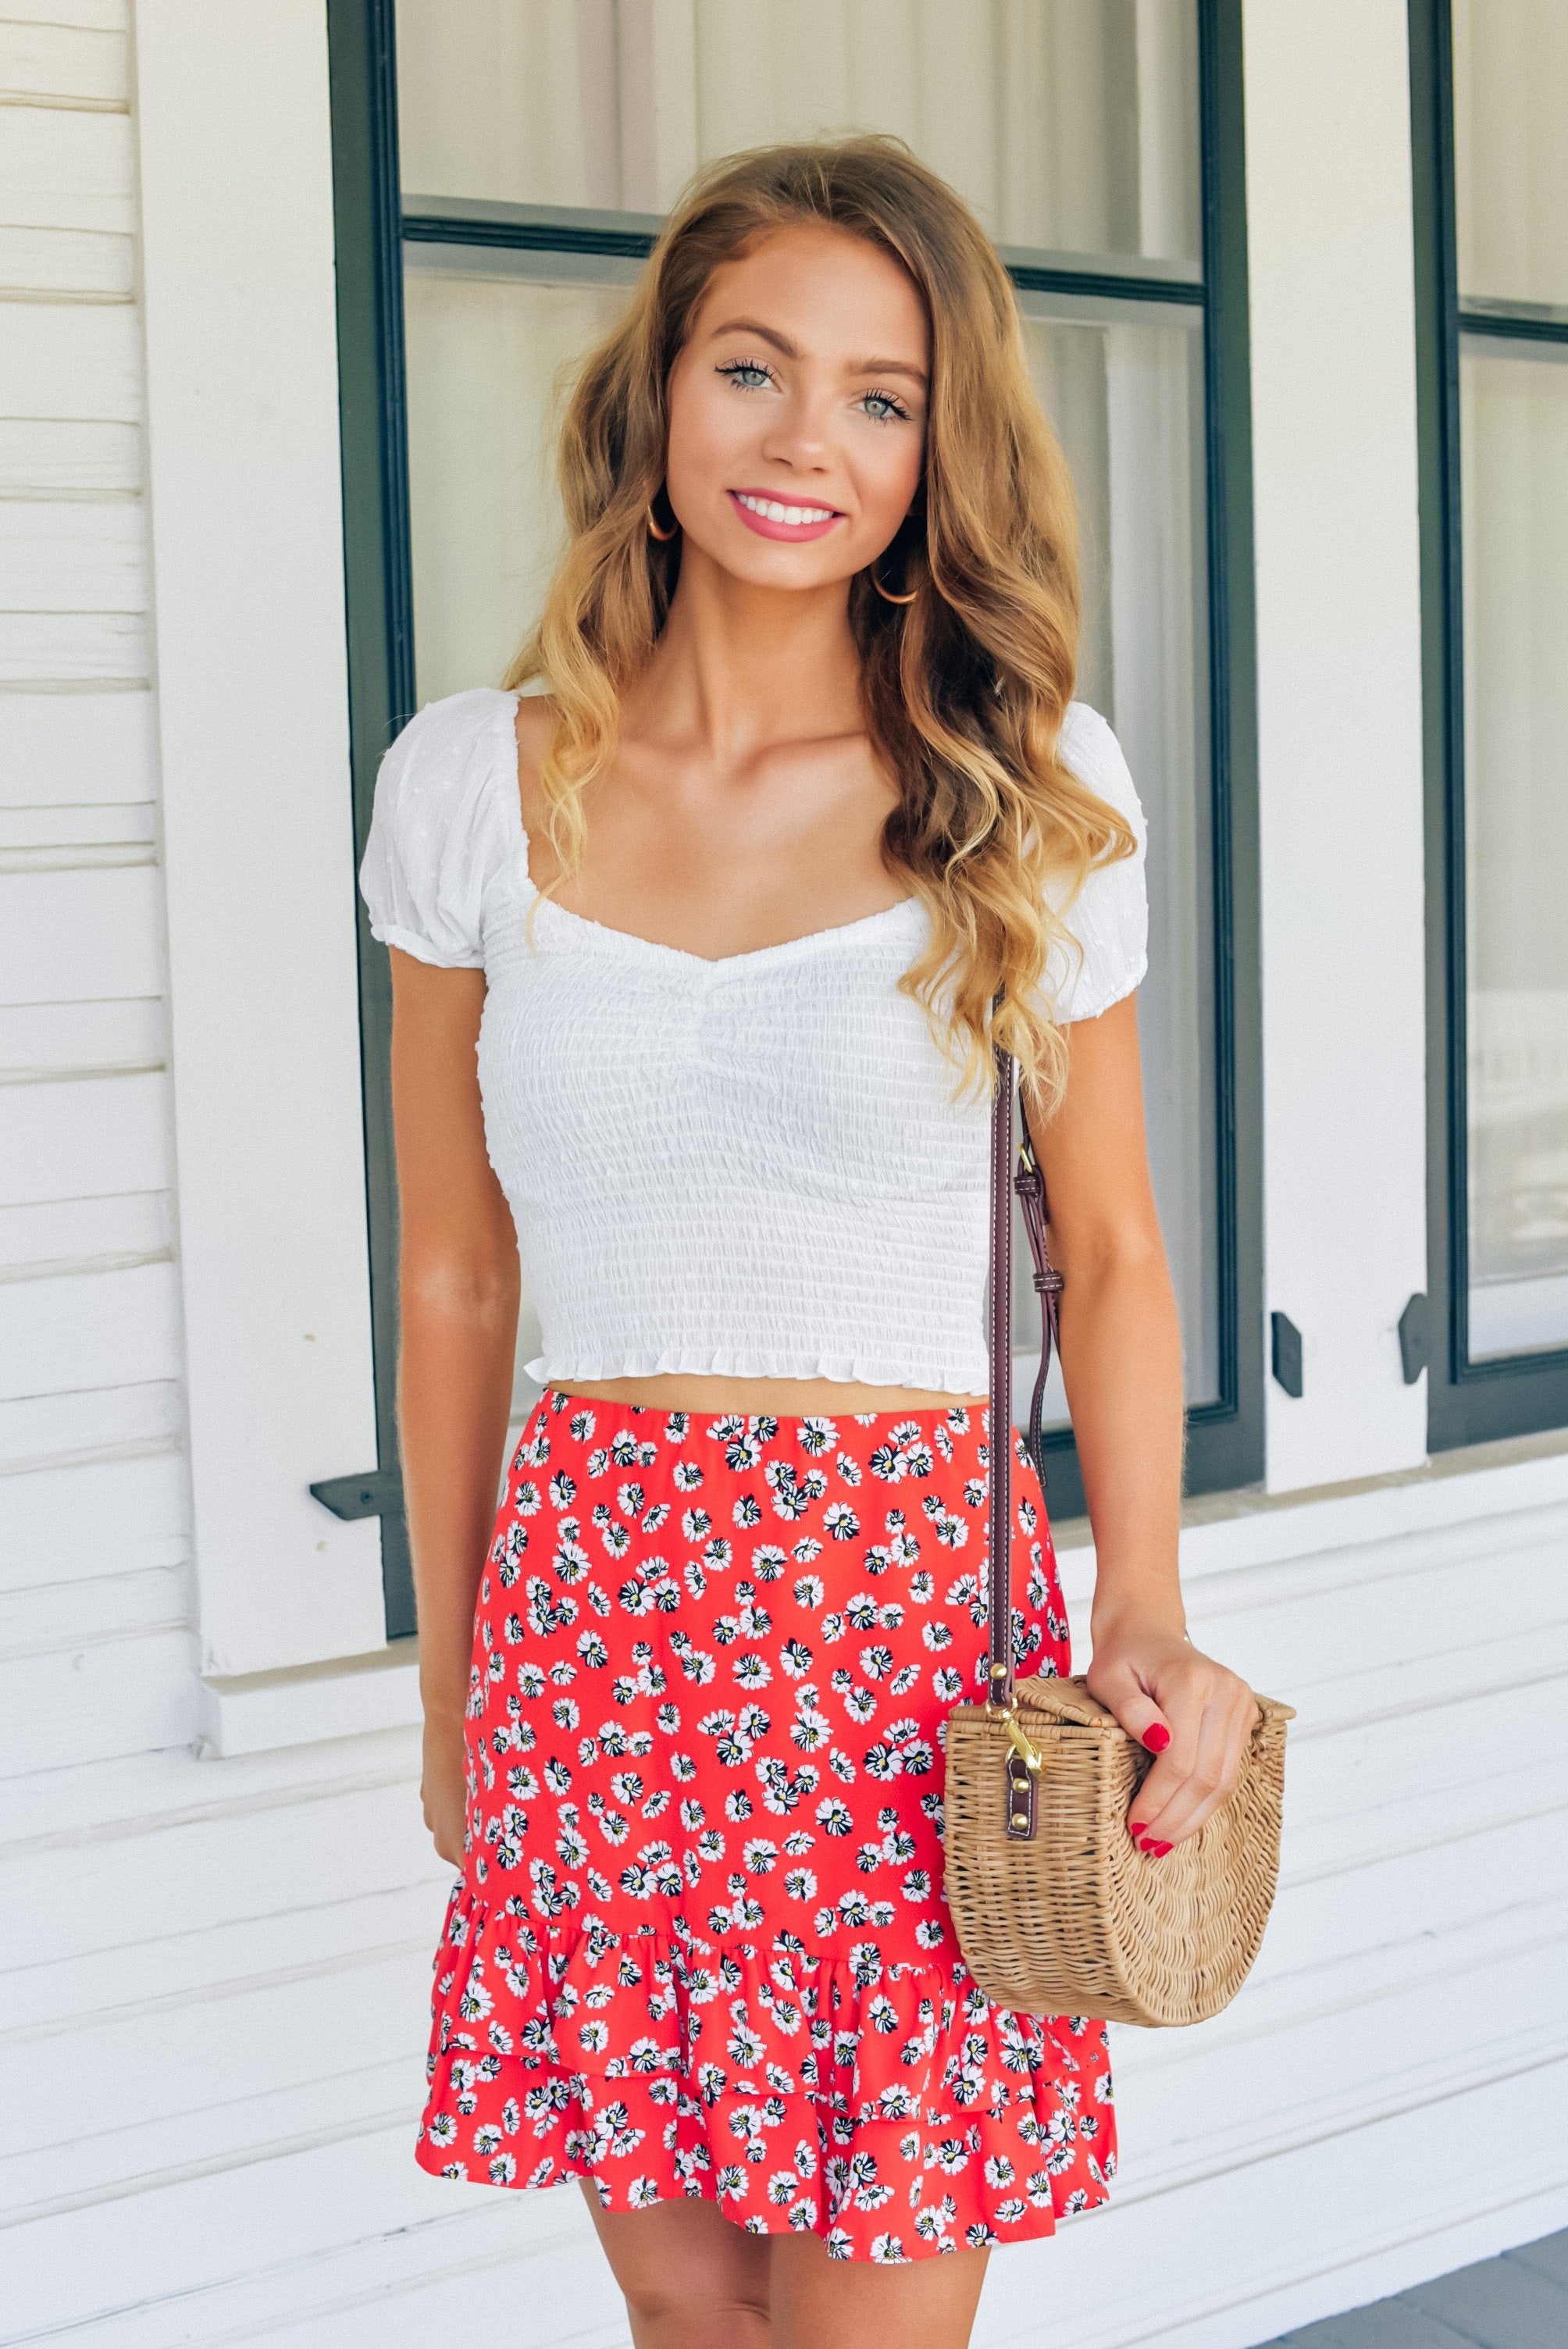 Summer Sweetheart Red Floral Skirt – Three Cords Boutique